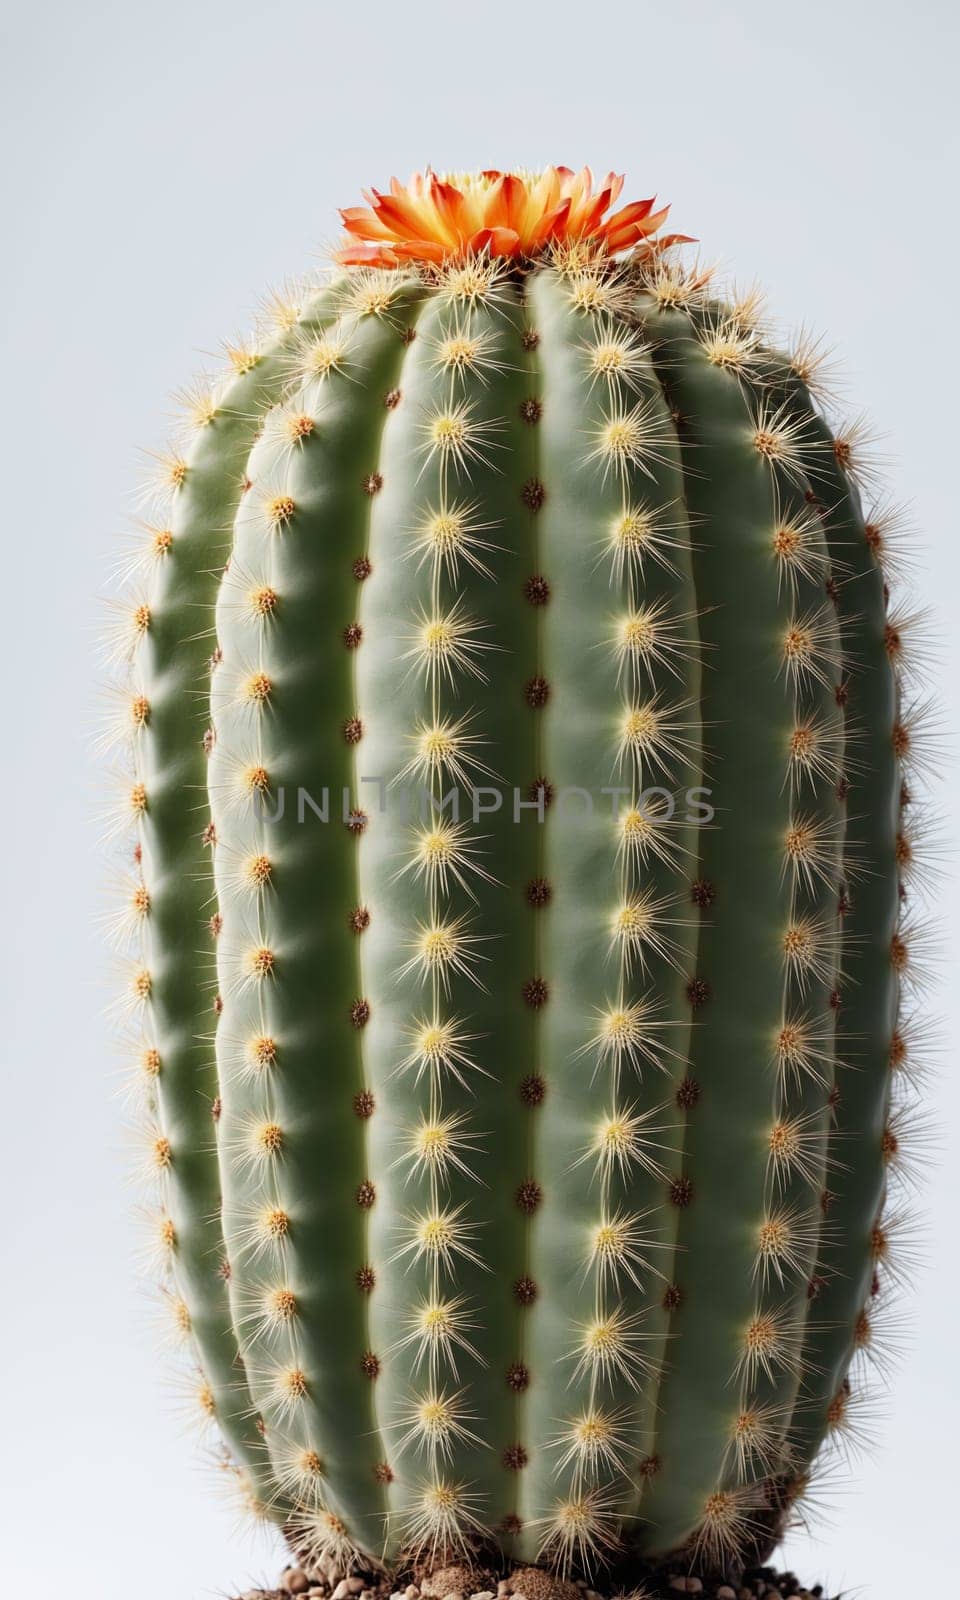 Cactus with yellow flower in pot on white background. Close up